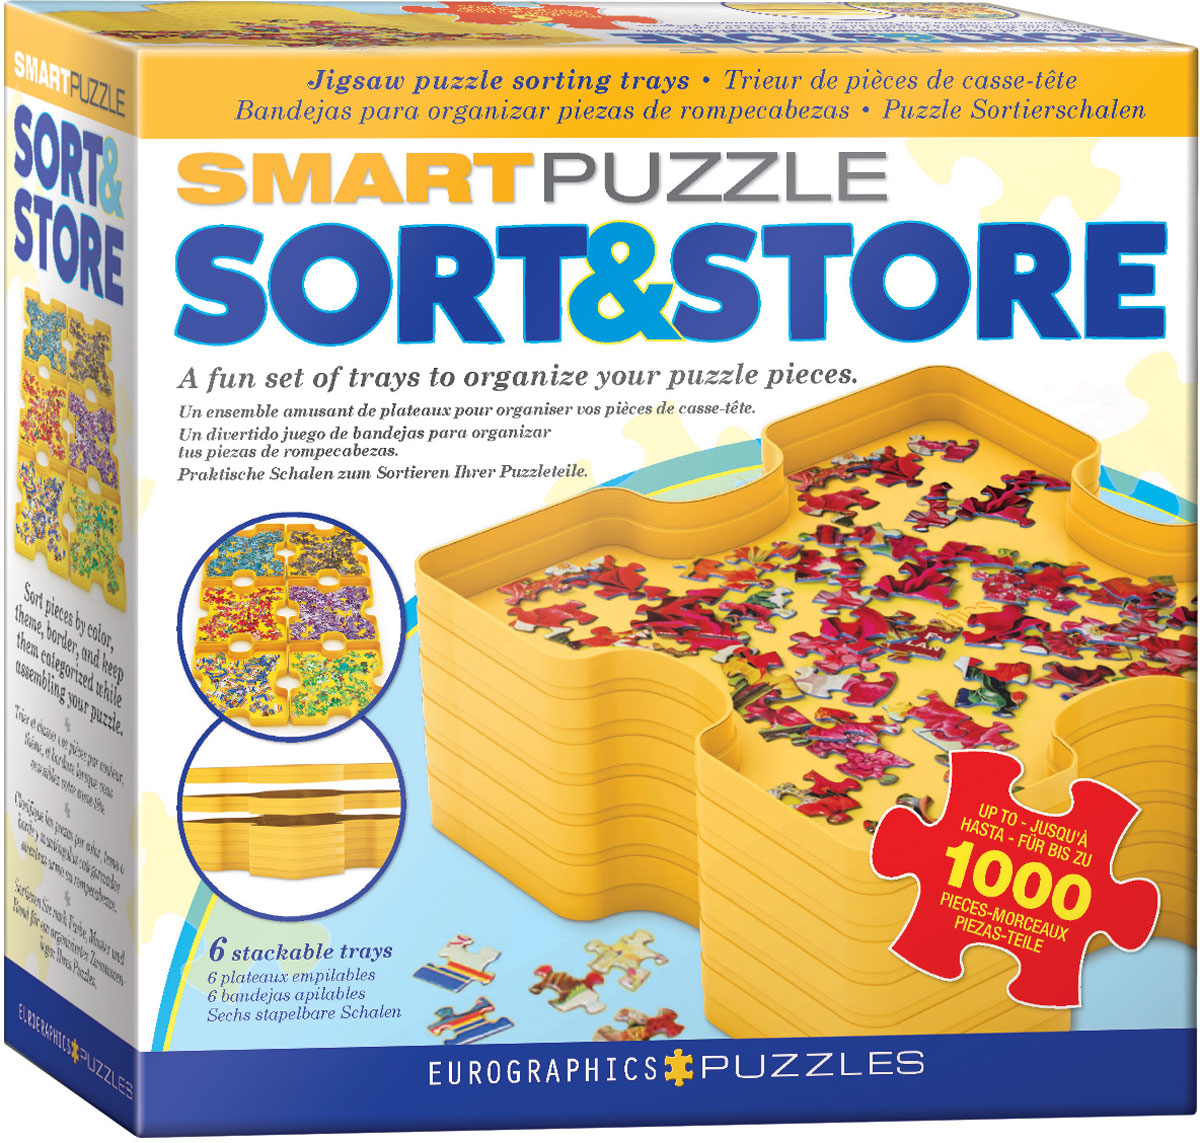 Smart Puzzle "Sort & Store" Trays